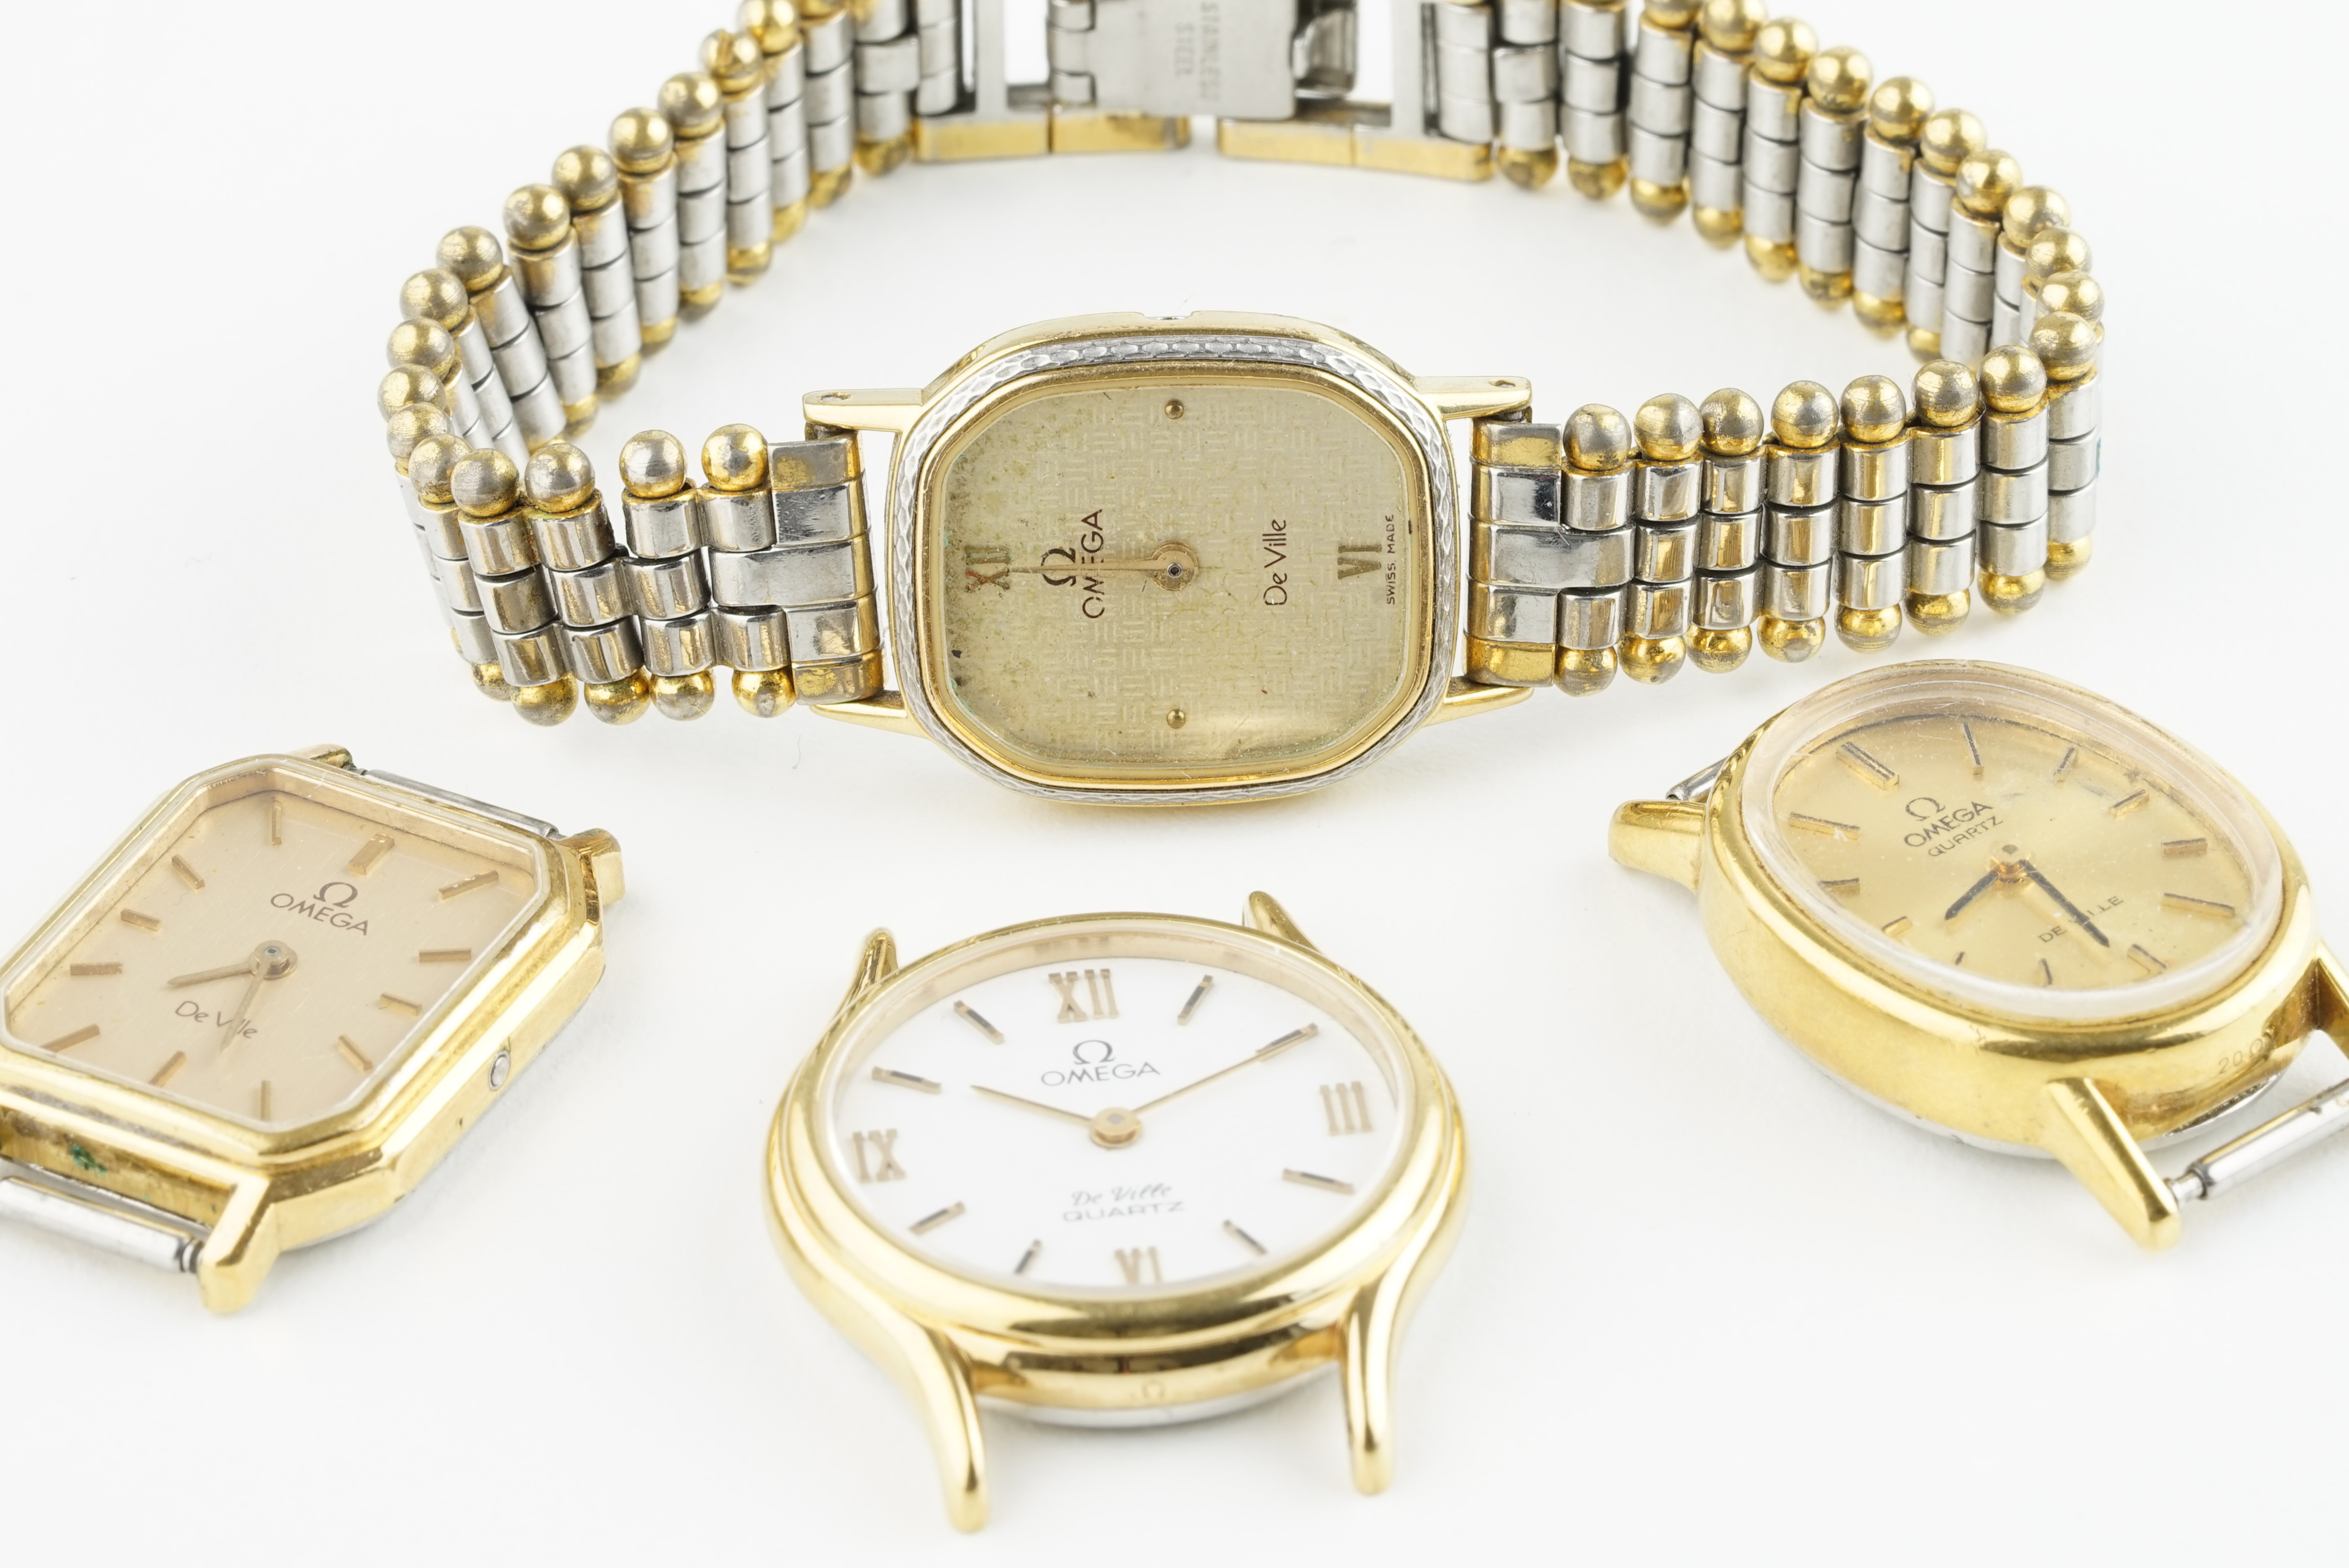 GROUP OF 4 LADIES OMEGA WRISTWATCHES, all four not working, need work.*** Please view images